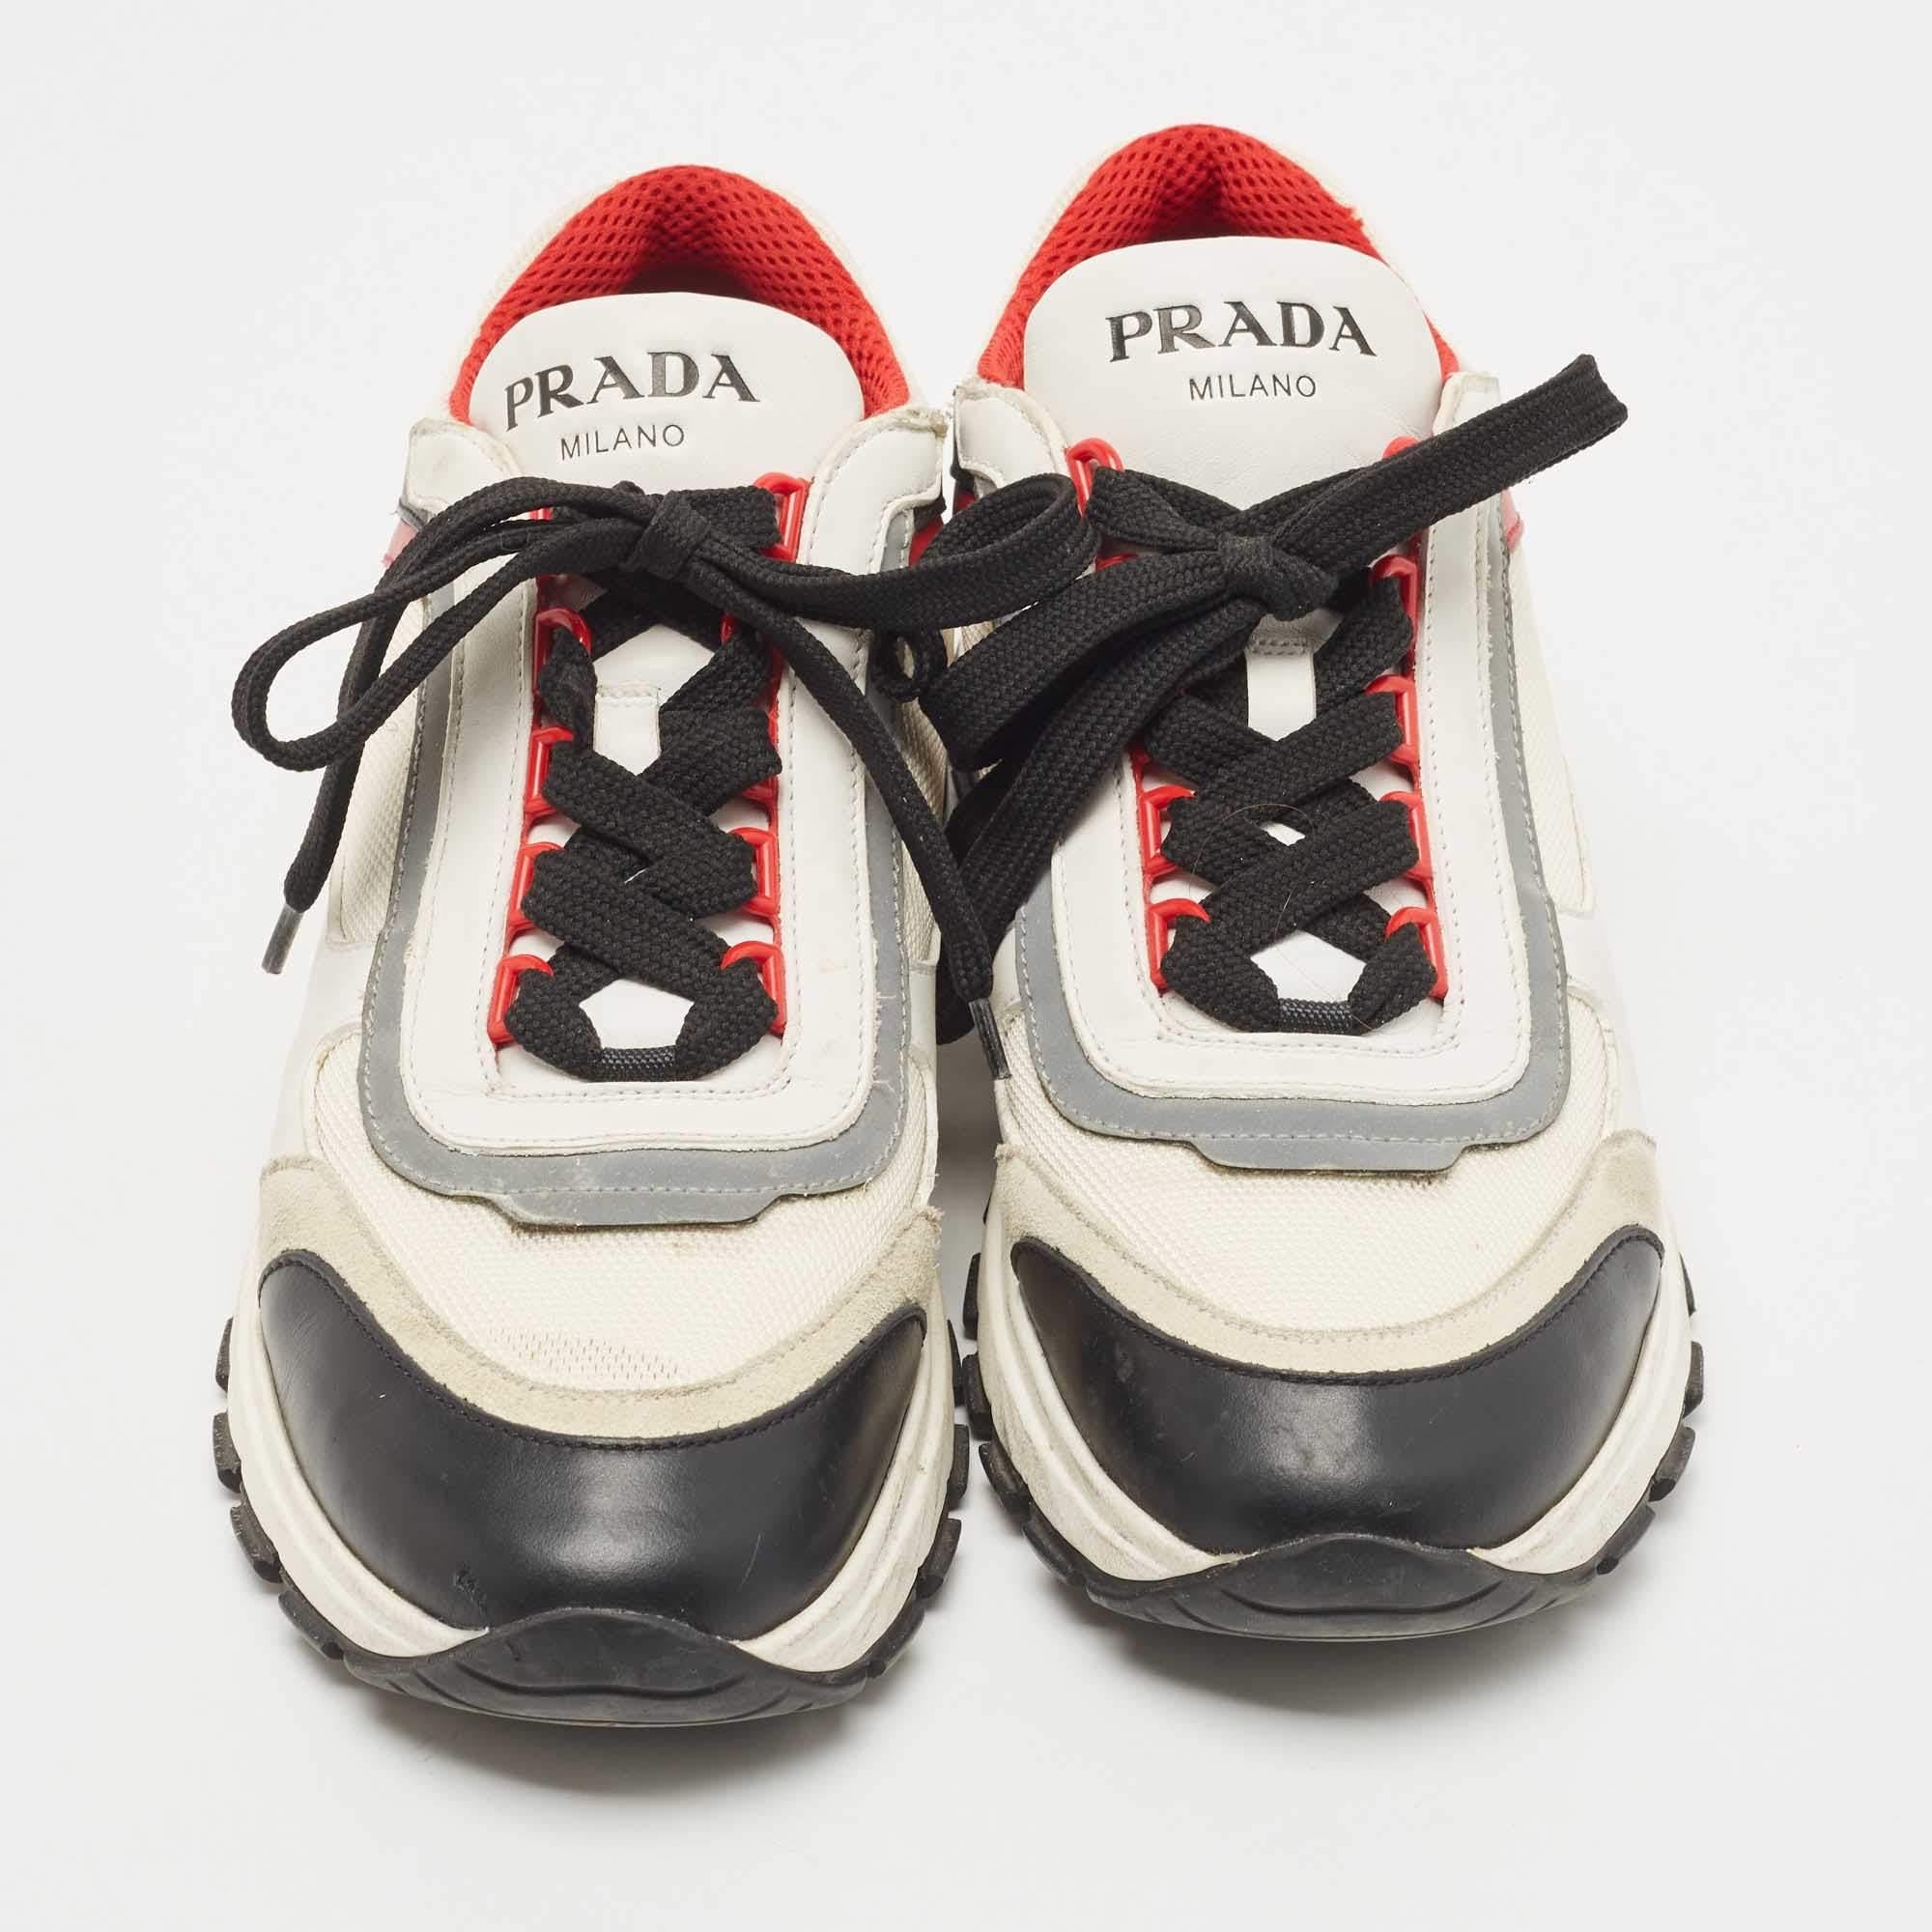 Prada Tricolor Mesh and Leather Low Top Sneakers Size 38 In Good Condition For Sale In Dubai, Al Qouz 2